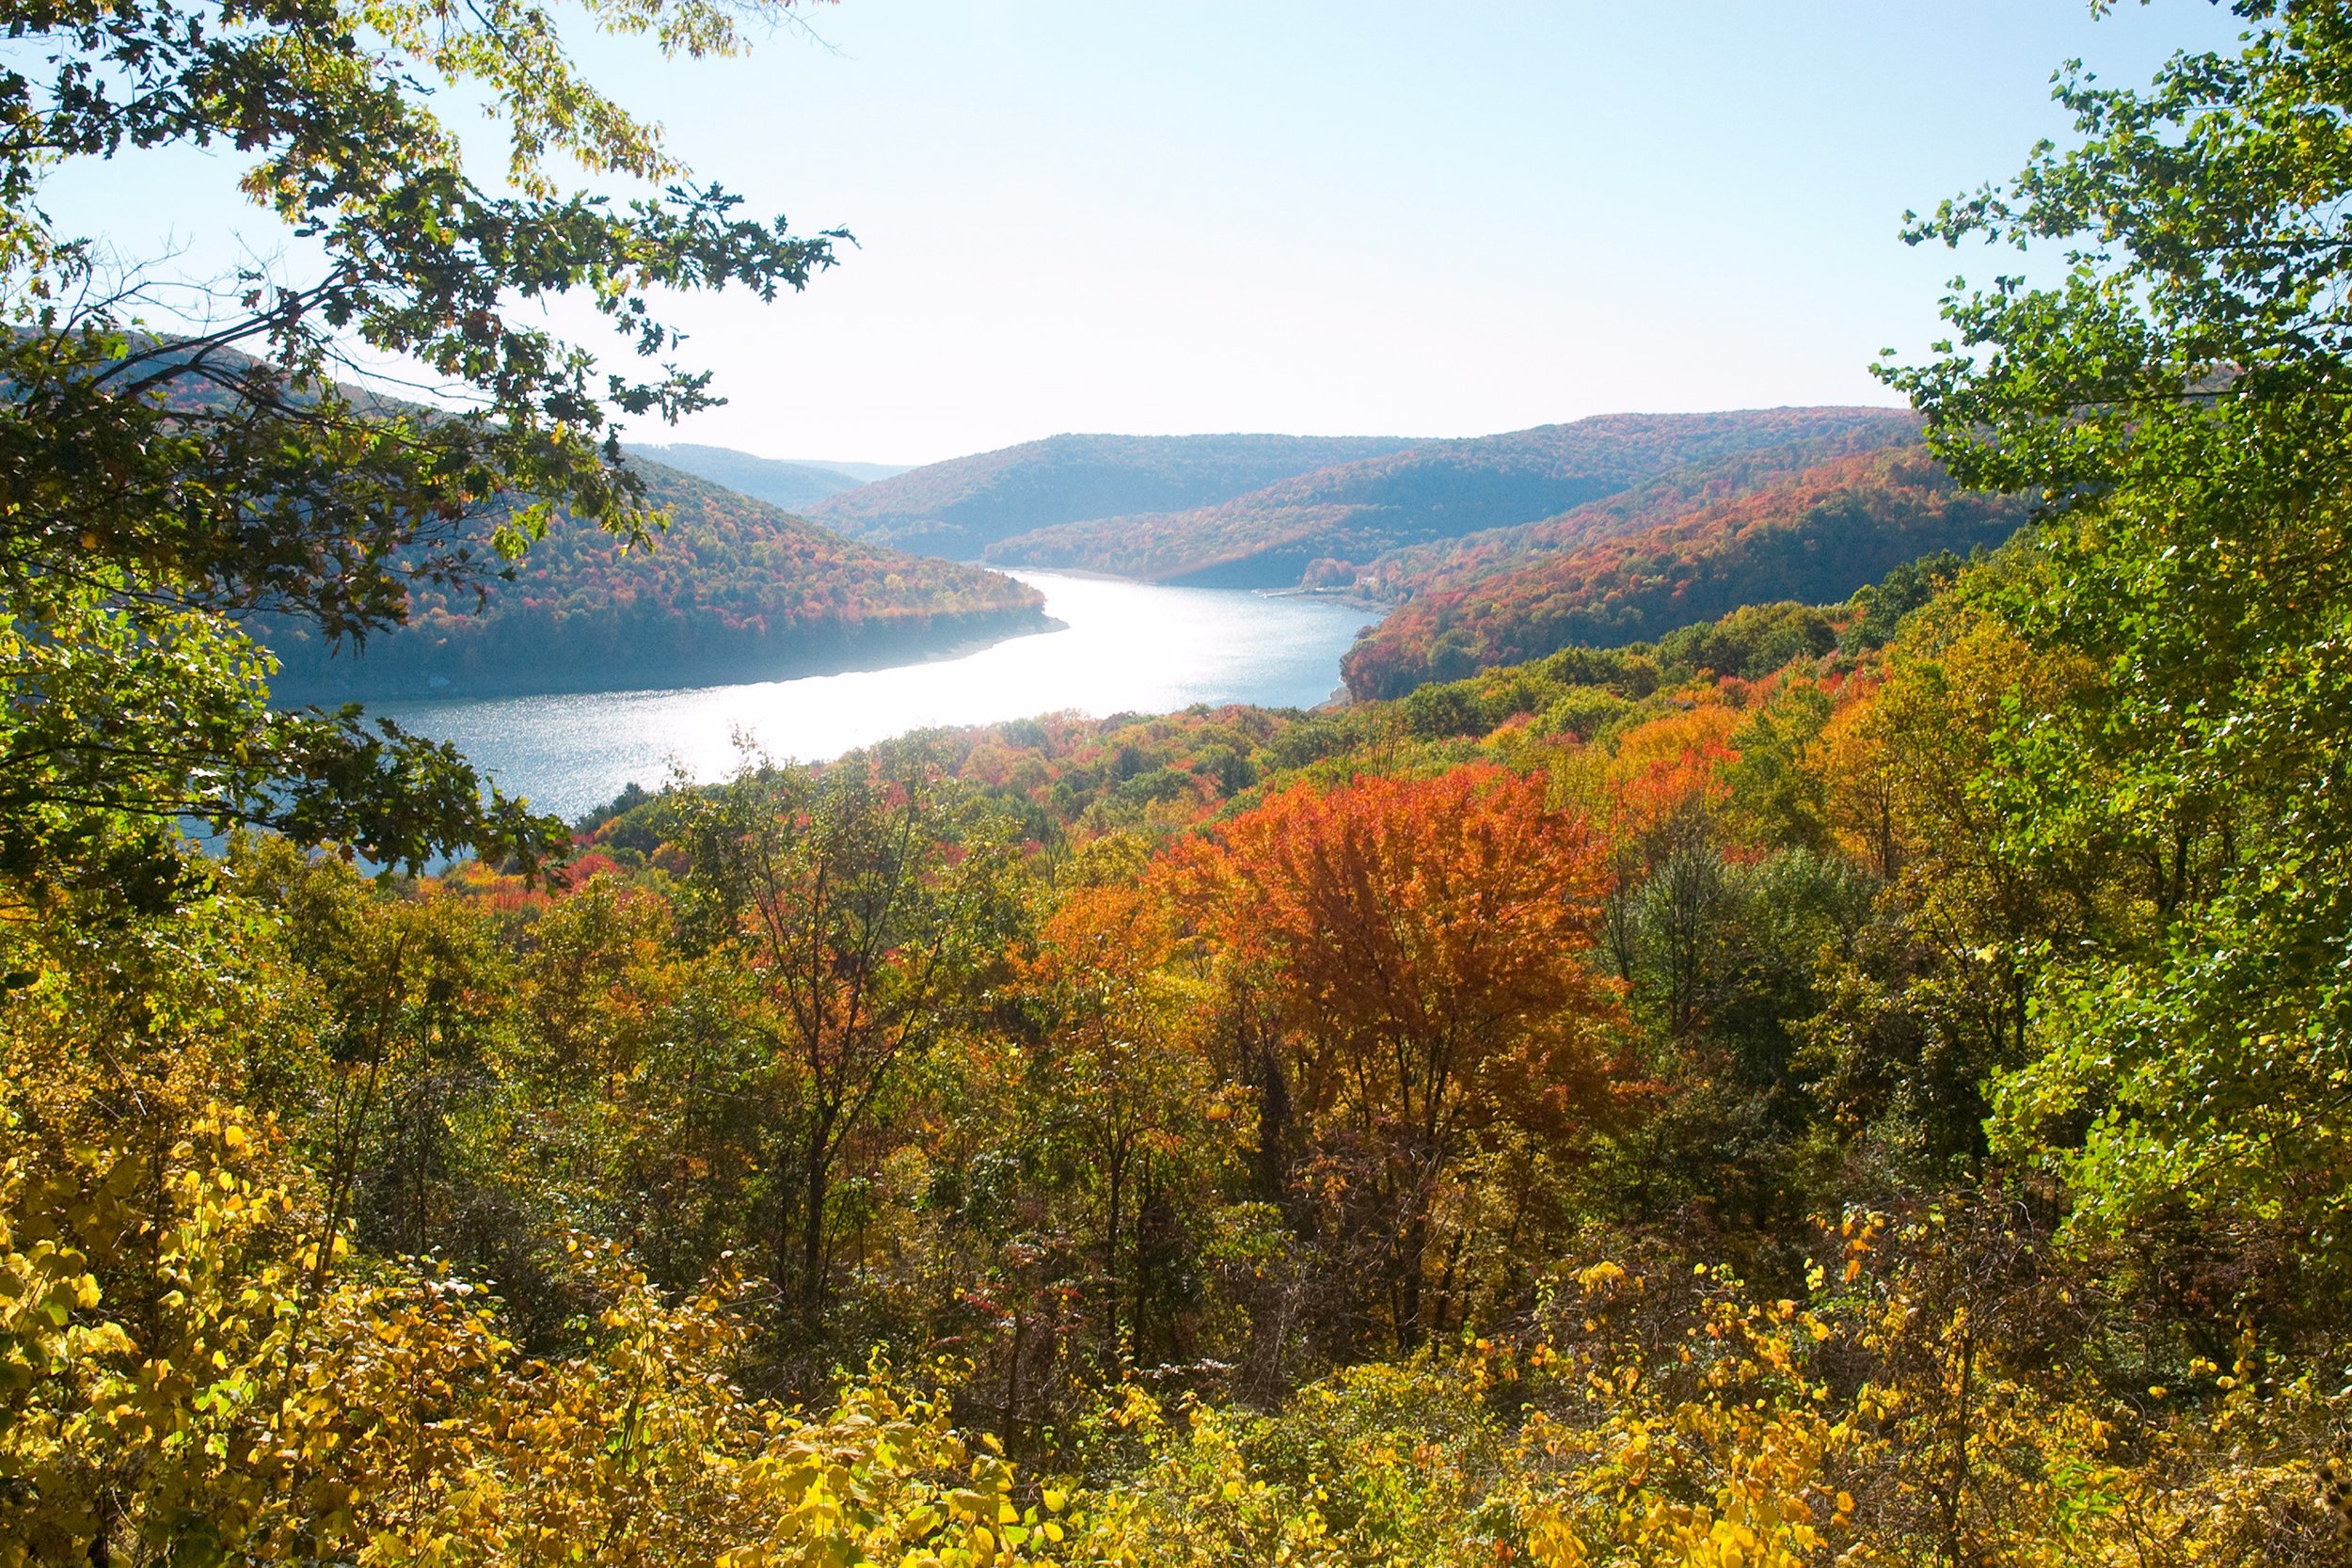 Explore northern Pennsylvania's spectacular Allegheny Mountains via this picturesque 100-mile ramble through the Sproul and Elk state forests along Pennsylvania Route 120. Reconnect with nature via awe-inspiring vistas of the West Branch Susquehanna River surrounded by forest while passing through quaint towns such as Lock Haven and Ridgeway.